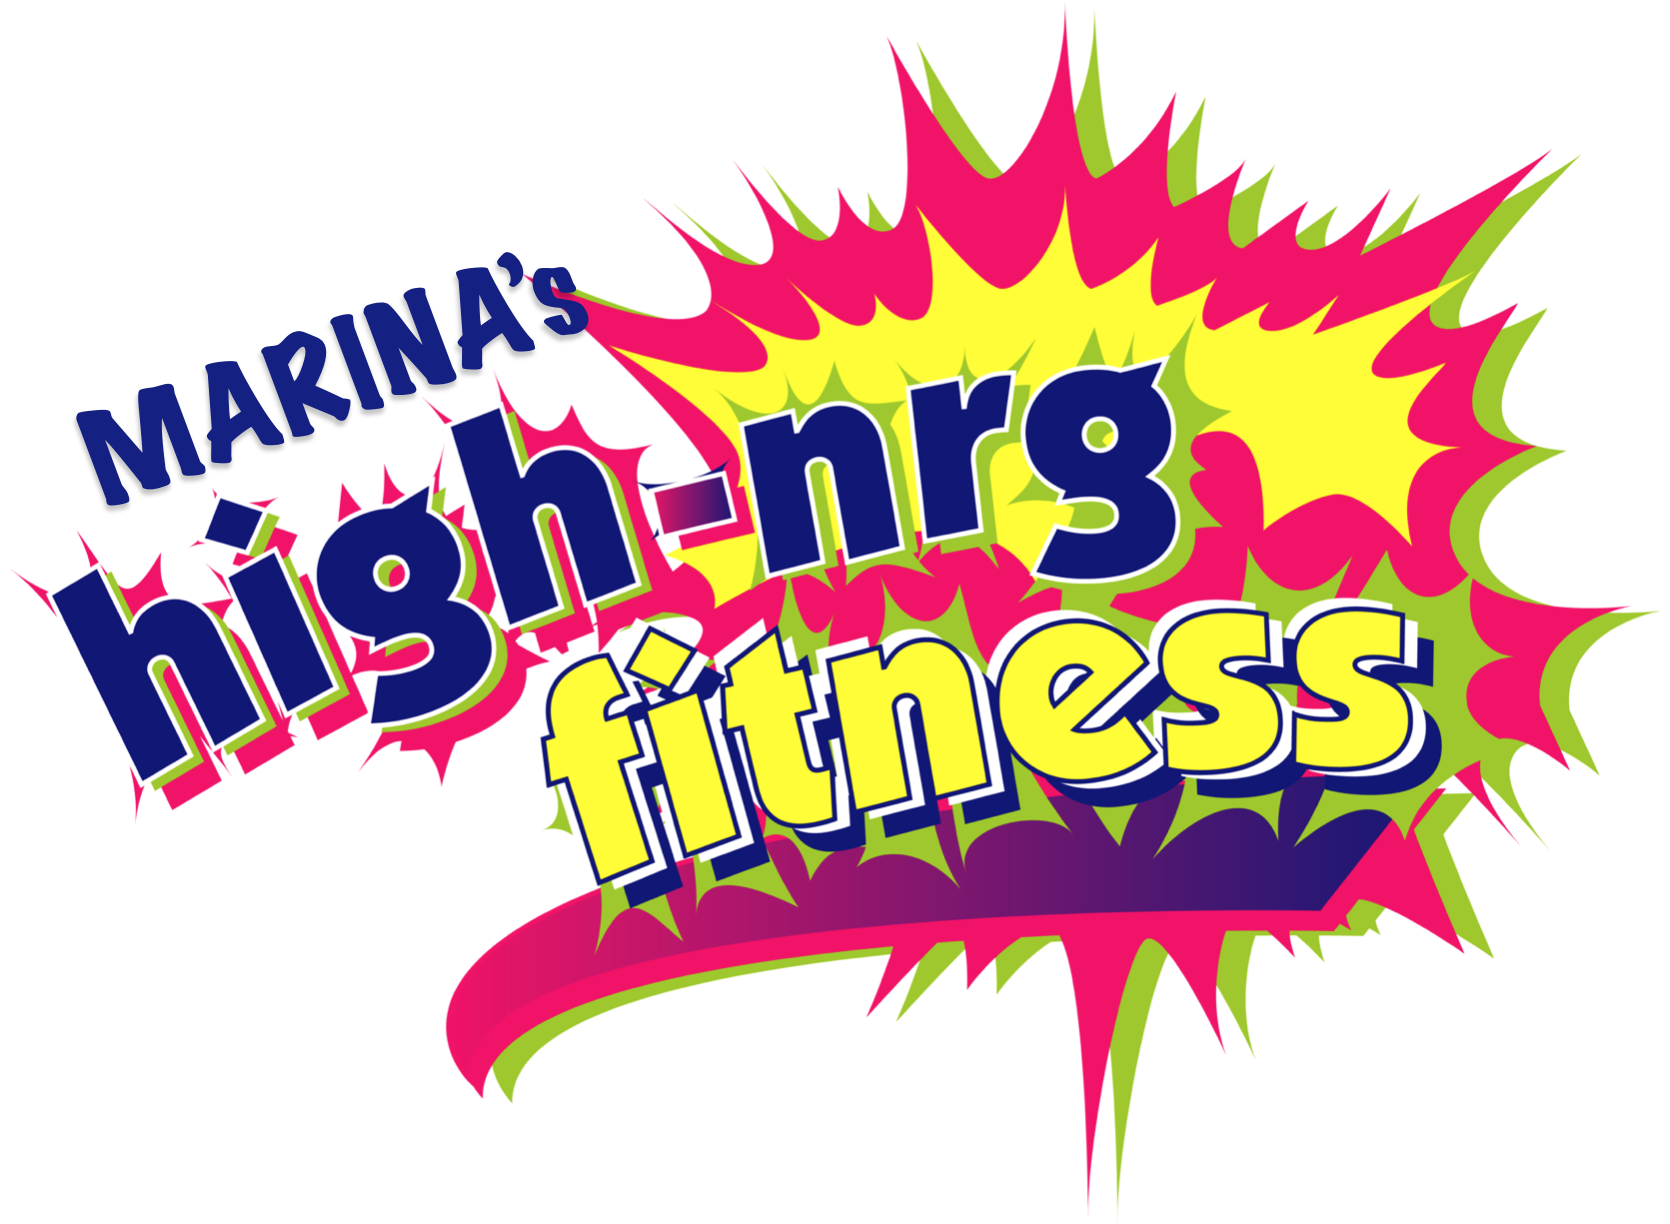 MARINA's High-nrg Fitness LIVE! ... an Interactive Musical Theatre WORKOUT Experience!